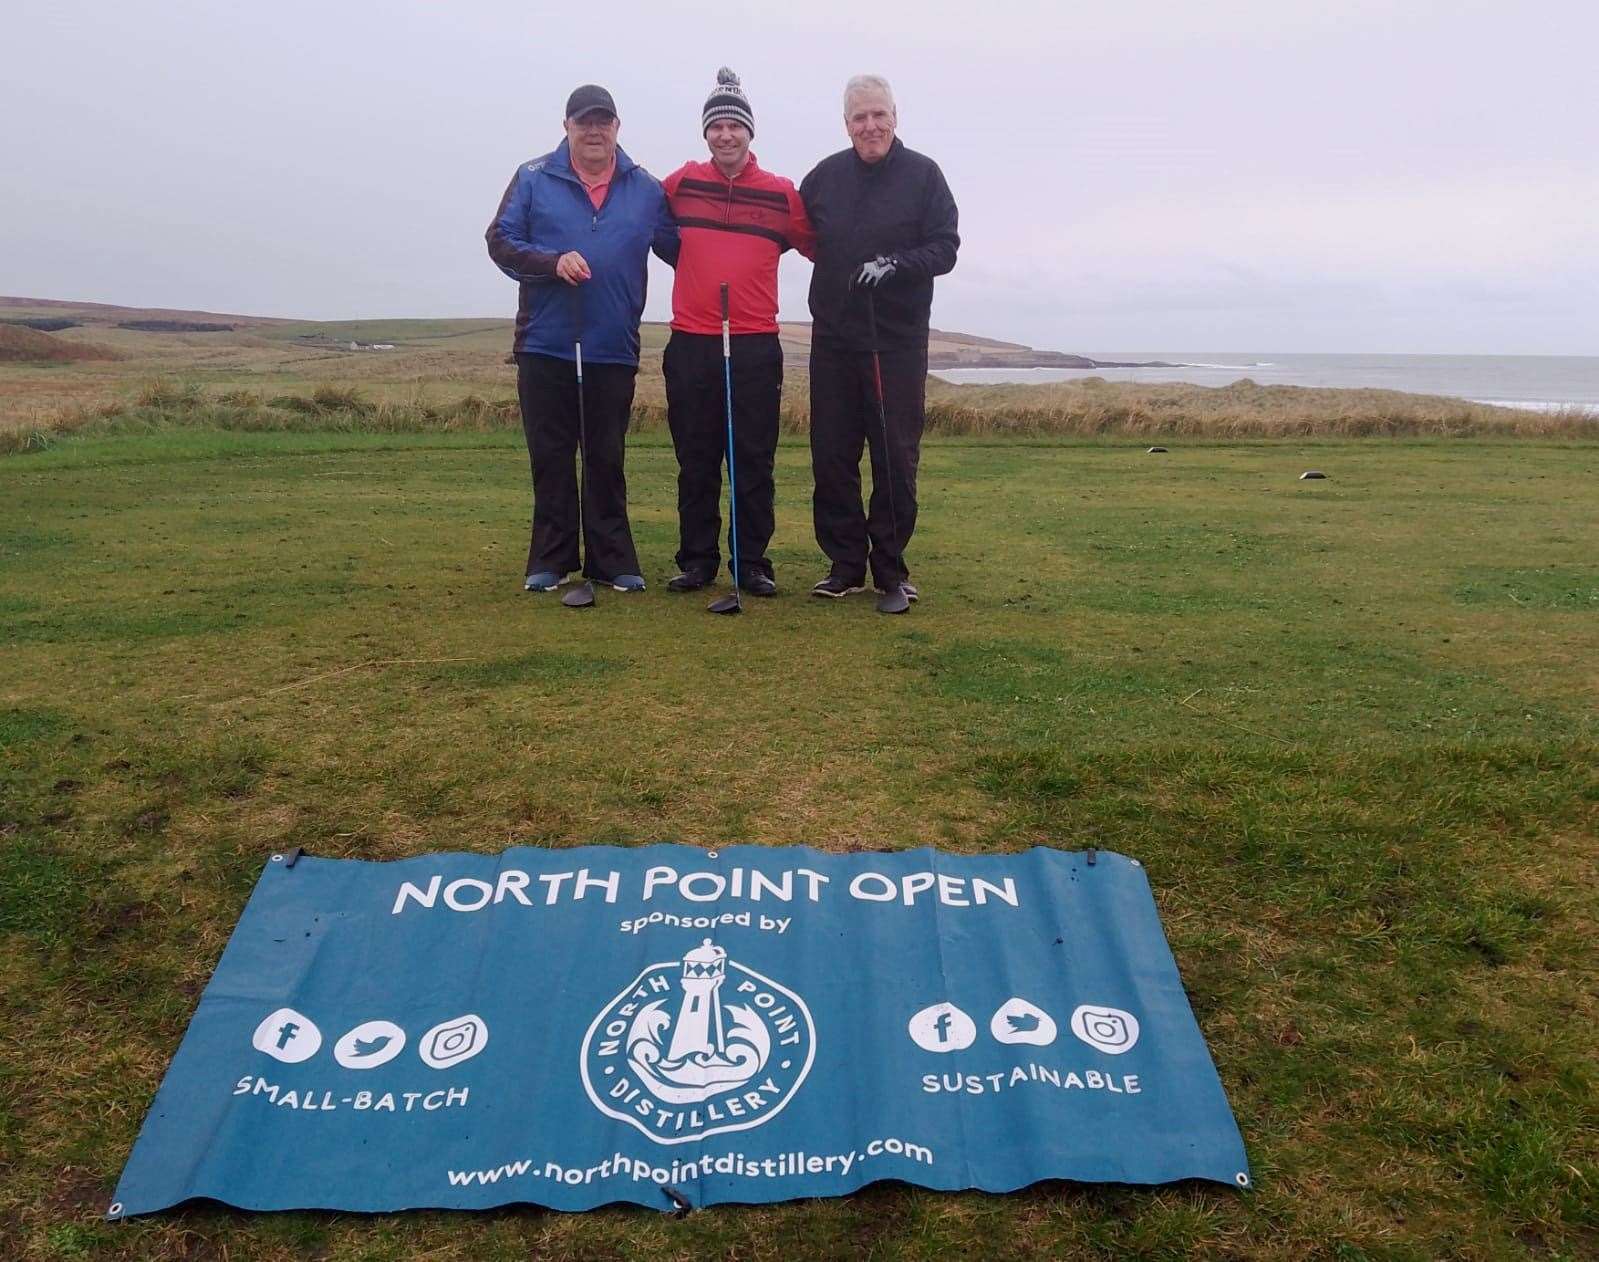 From left: Mike Halliday, Colin Munro and Alex Anderson prior to teeing off in the North Point Distillery Open.